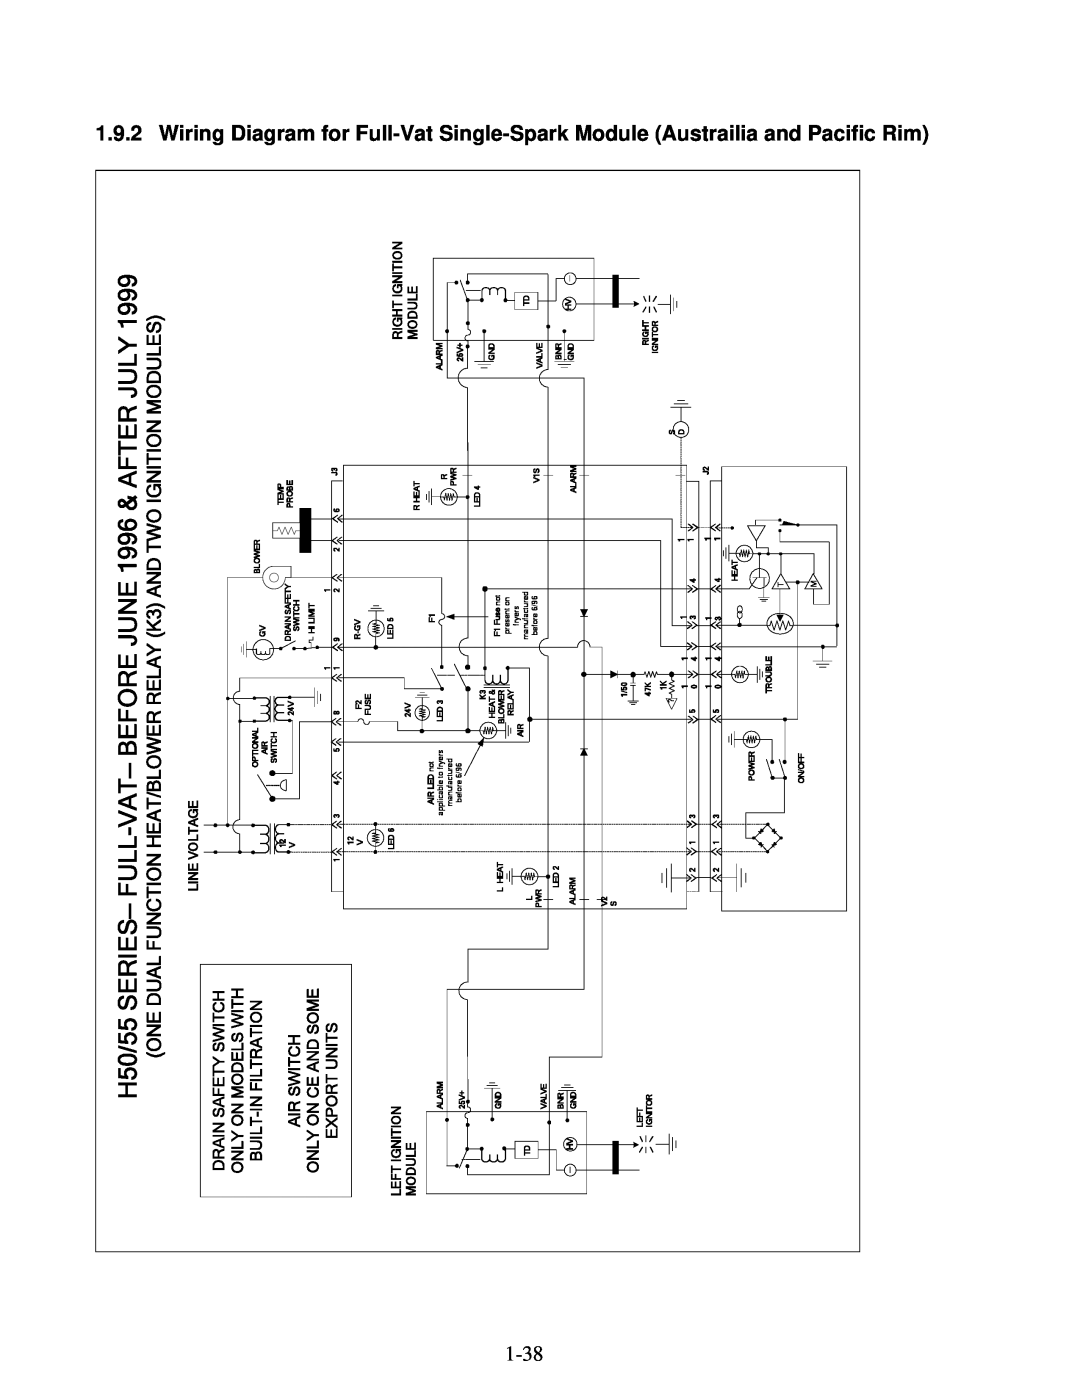 Frymaster H50 manual Wiring, Diagram, Full, Austrailia, Pacific Rim, Single, Spark, Module, Only On Ce And Some 